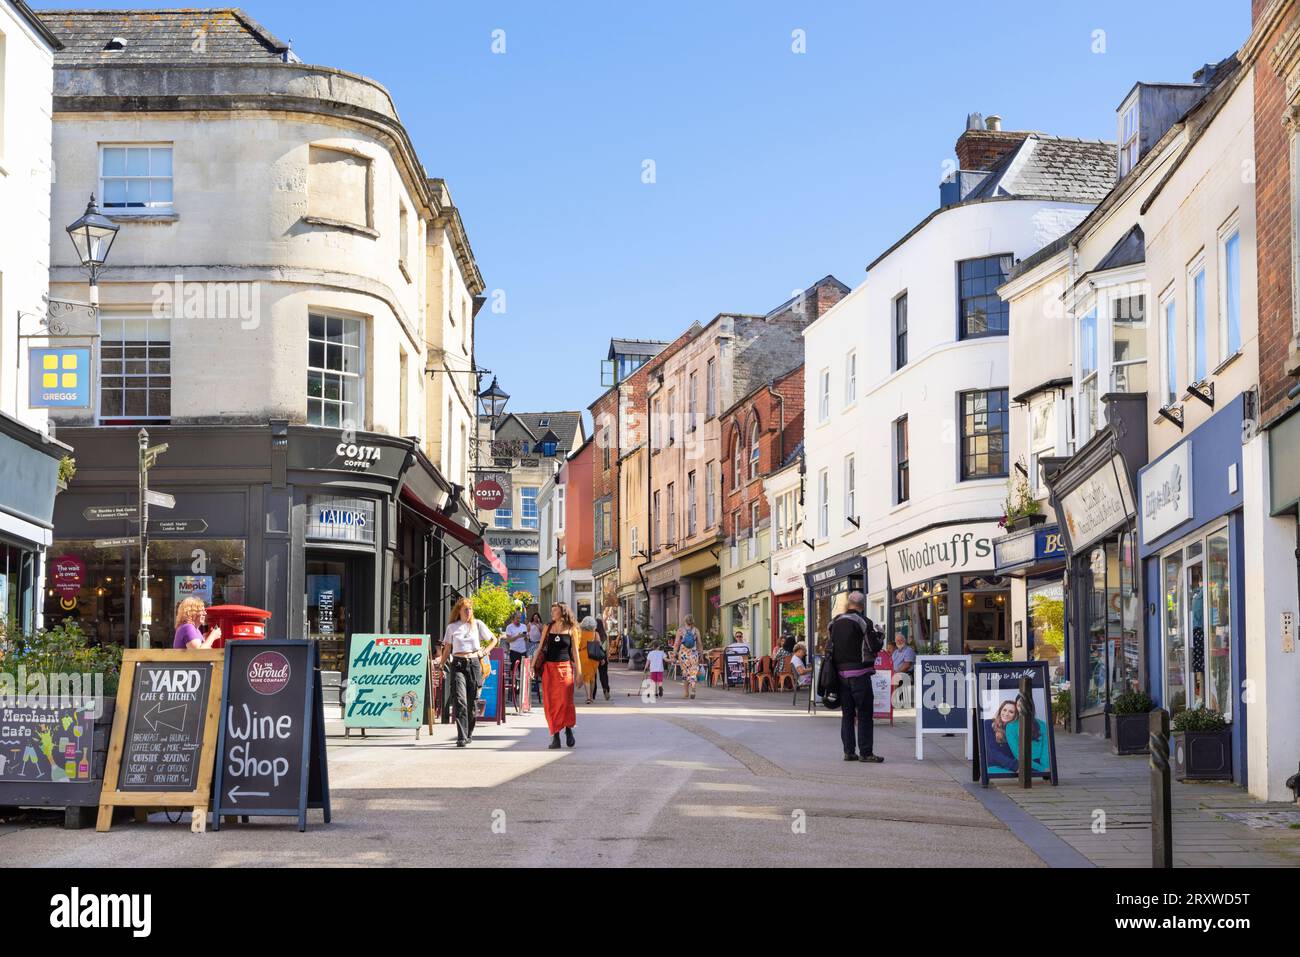 Stroud town centre Costa coffee and shops on the High street Stroud Gloucestershire England UK GB Europe Stock Photo